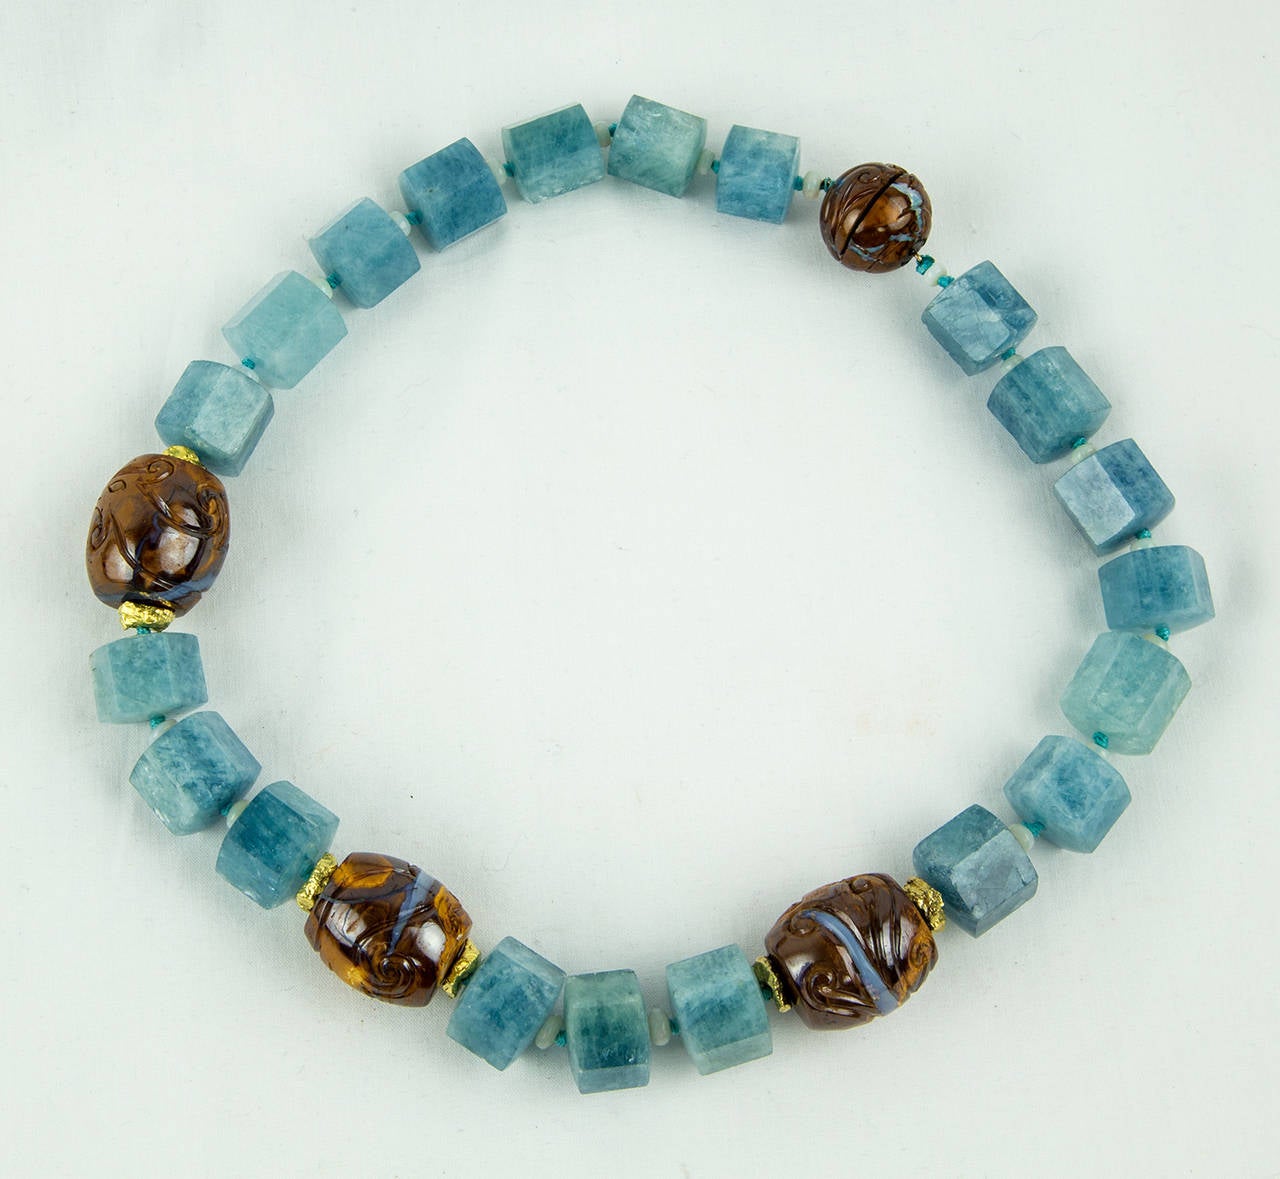 Simply Beautiful! Hand carved Hexagon Aquamarine and Natural Opal in Matrix Beads inter-spaced with Gilt Sterling Silver Rondelles featured in this Fabulous Hand crafted Necklace. Held by an enhanced Crystal clasp. Necklace measures approx. 17.5”